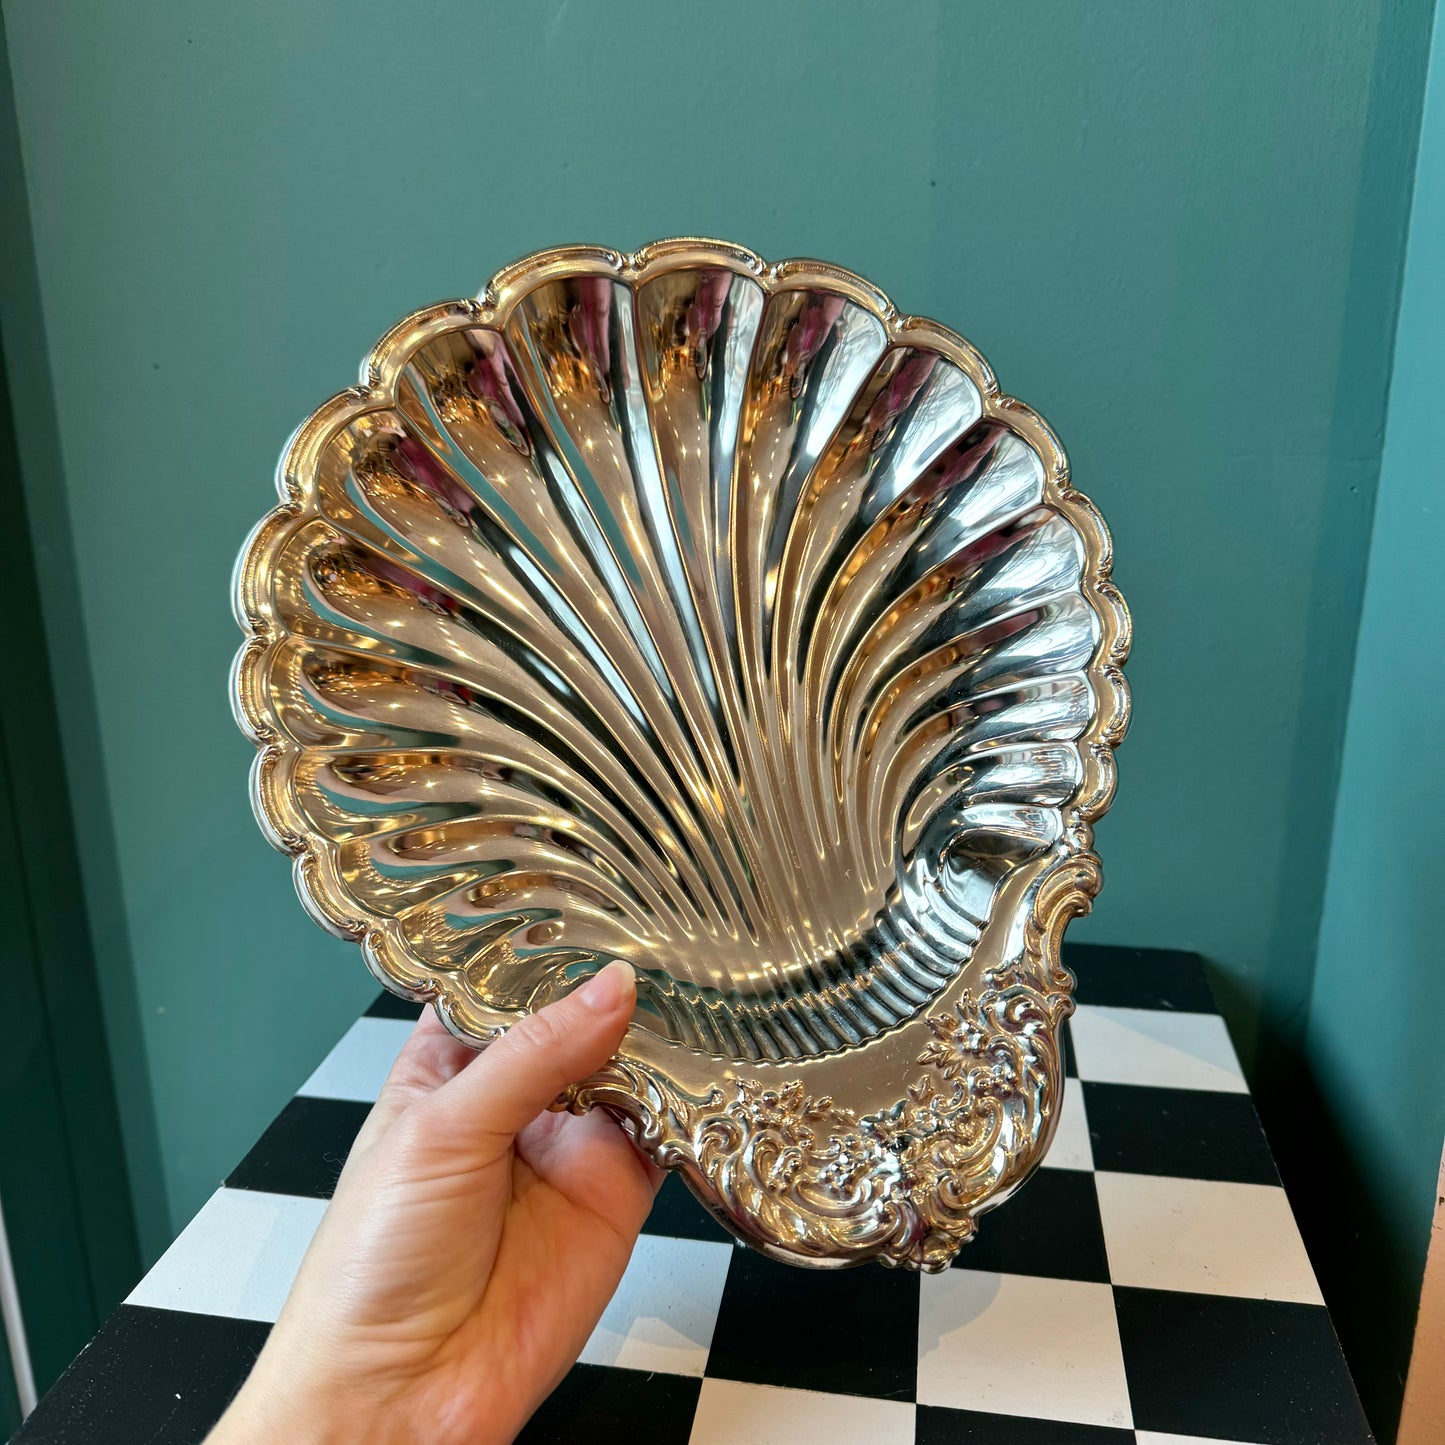 Vintage Silver Plated Shell Catchall Dish